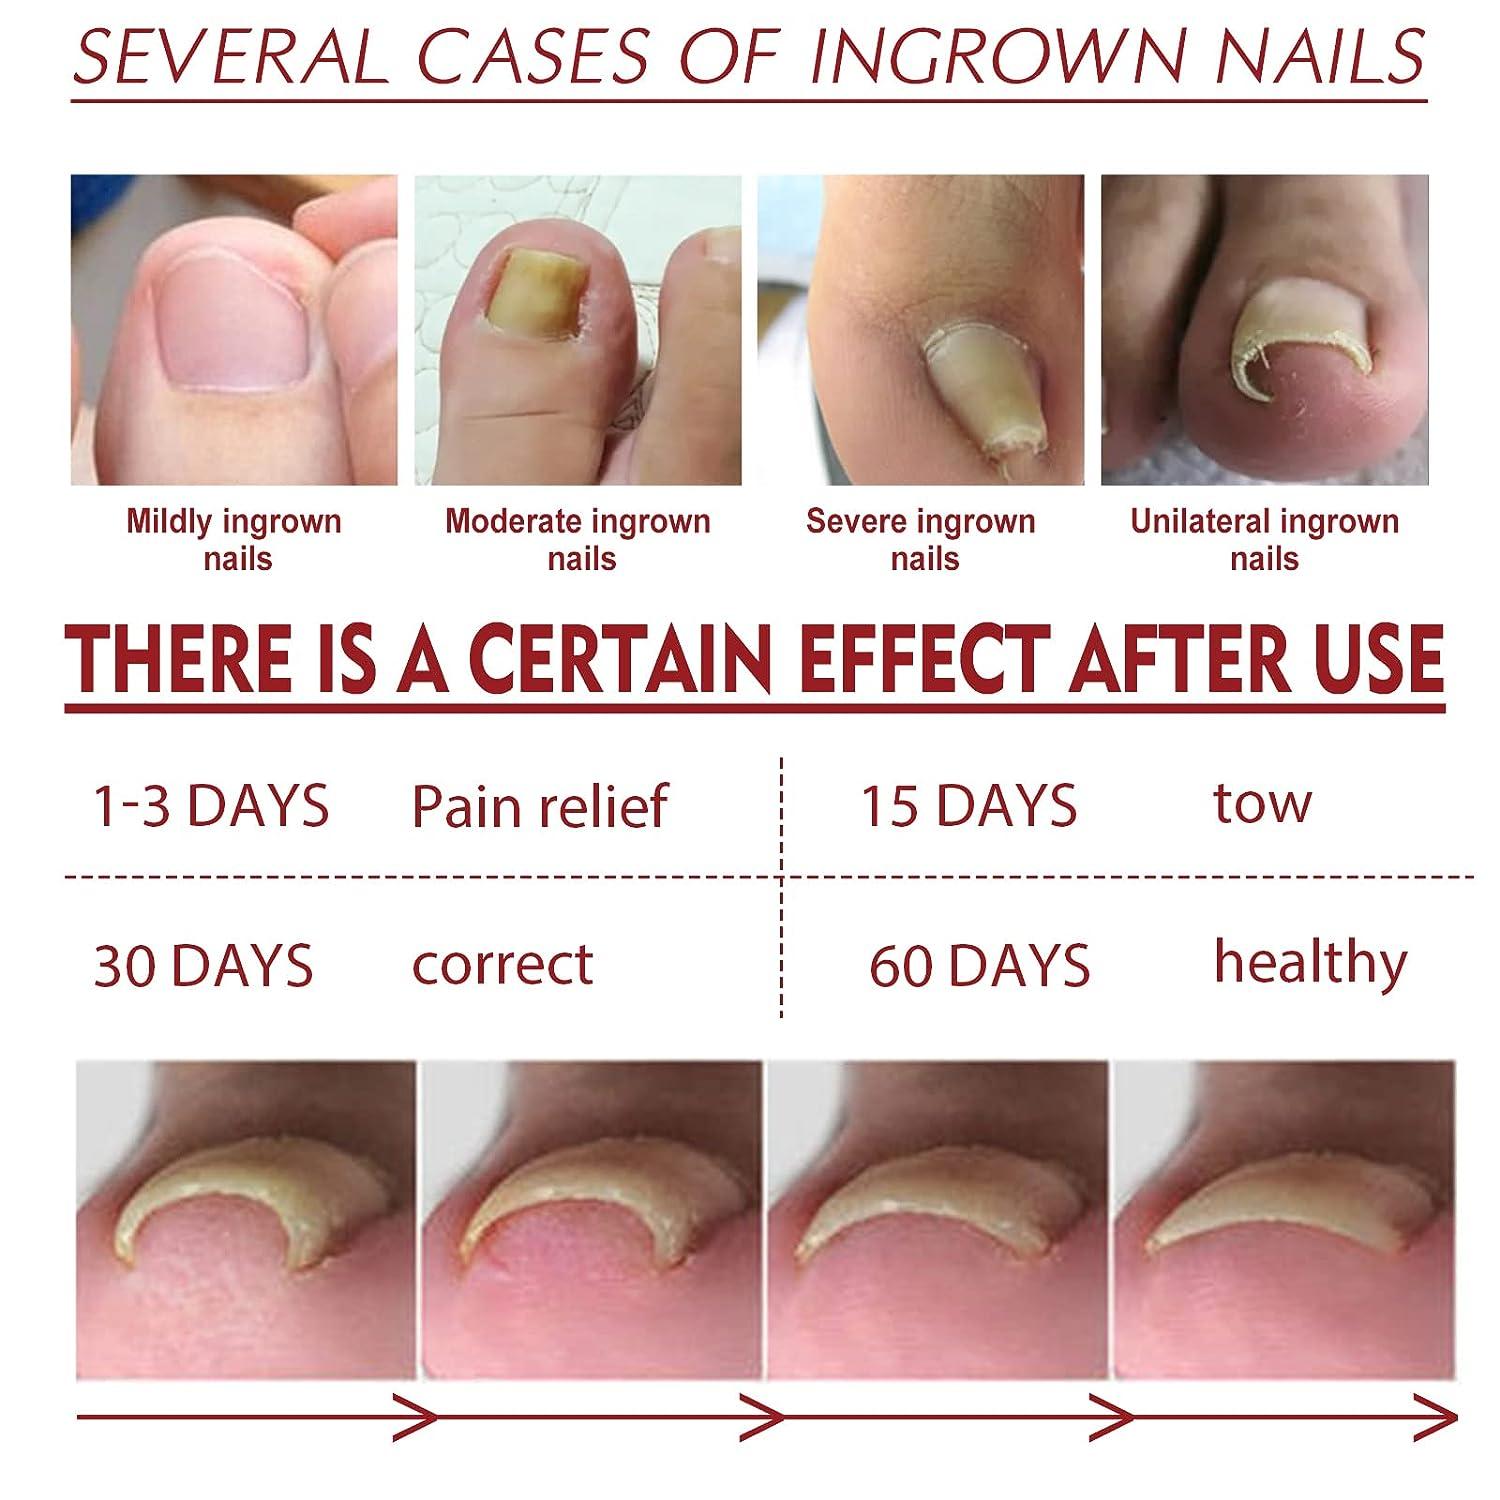 How to Rid Yourself of Toenail Fungus? - By Dr. Abhay Talathi | Lybrate